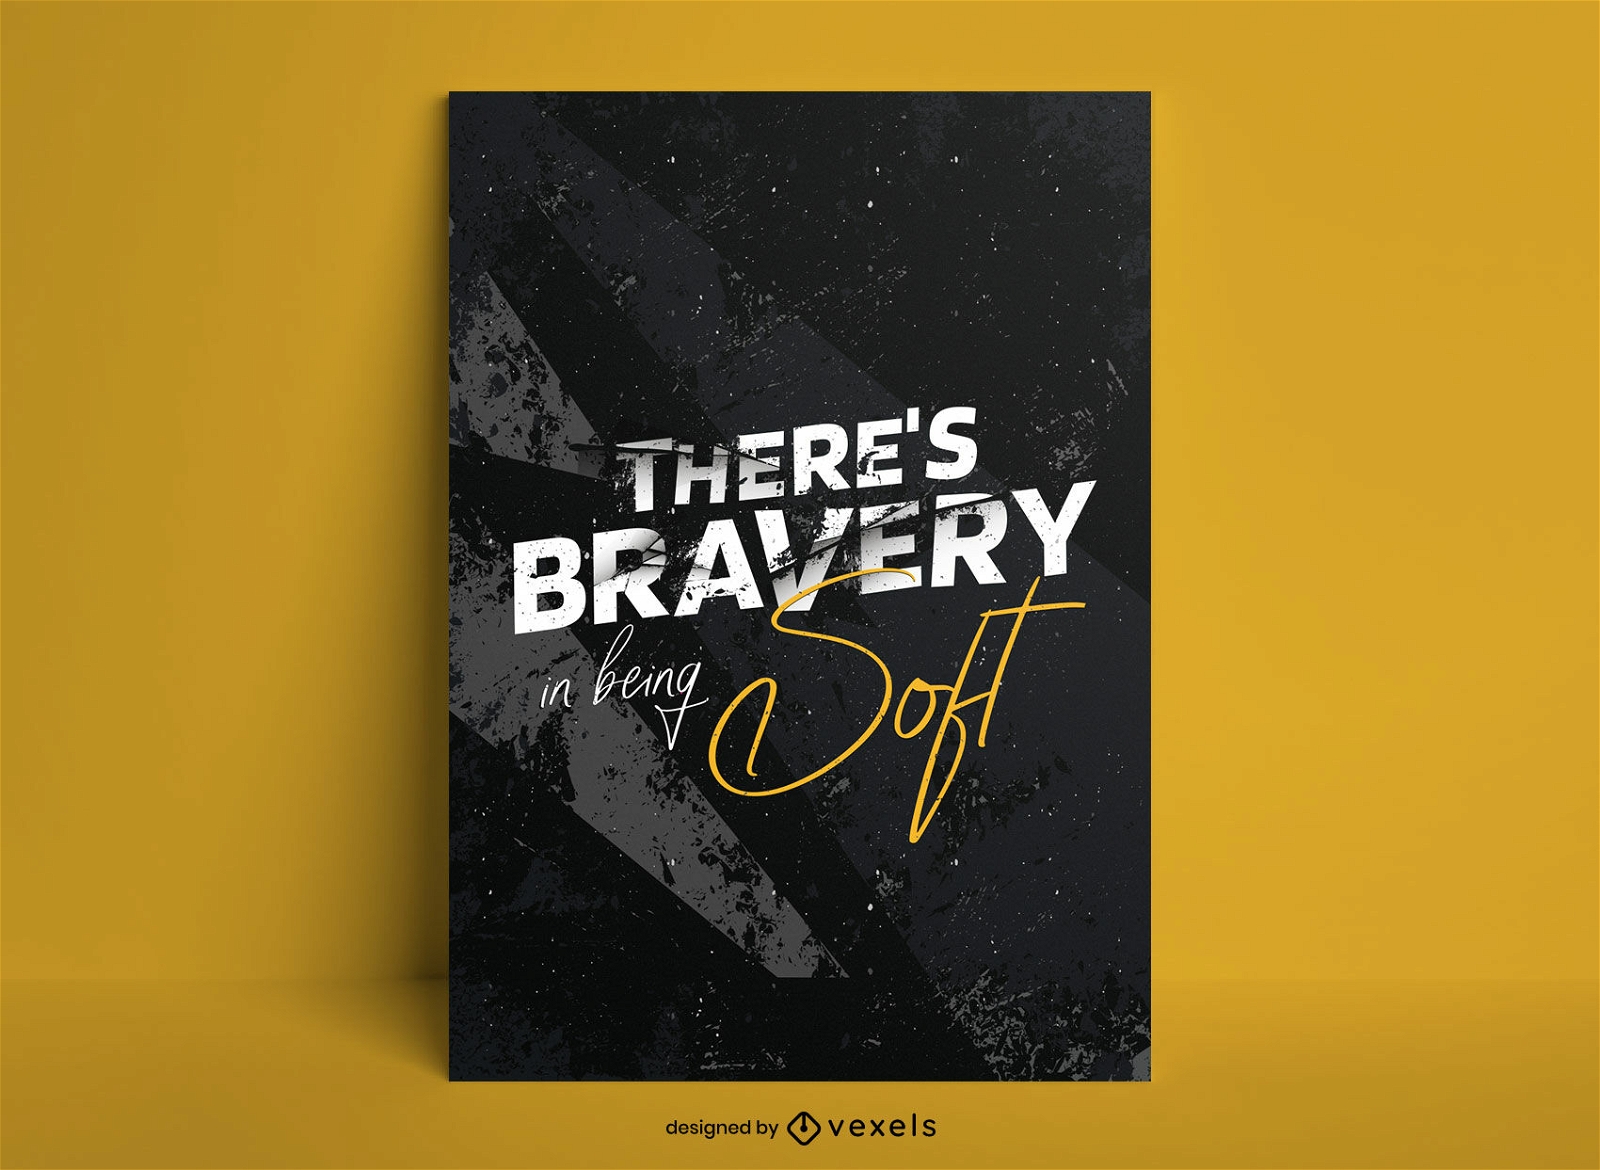 Bravery quote punk poster template